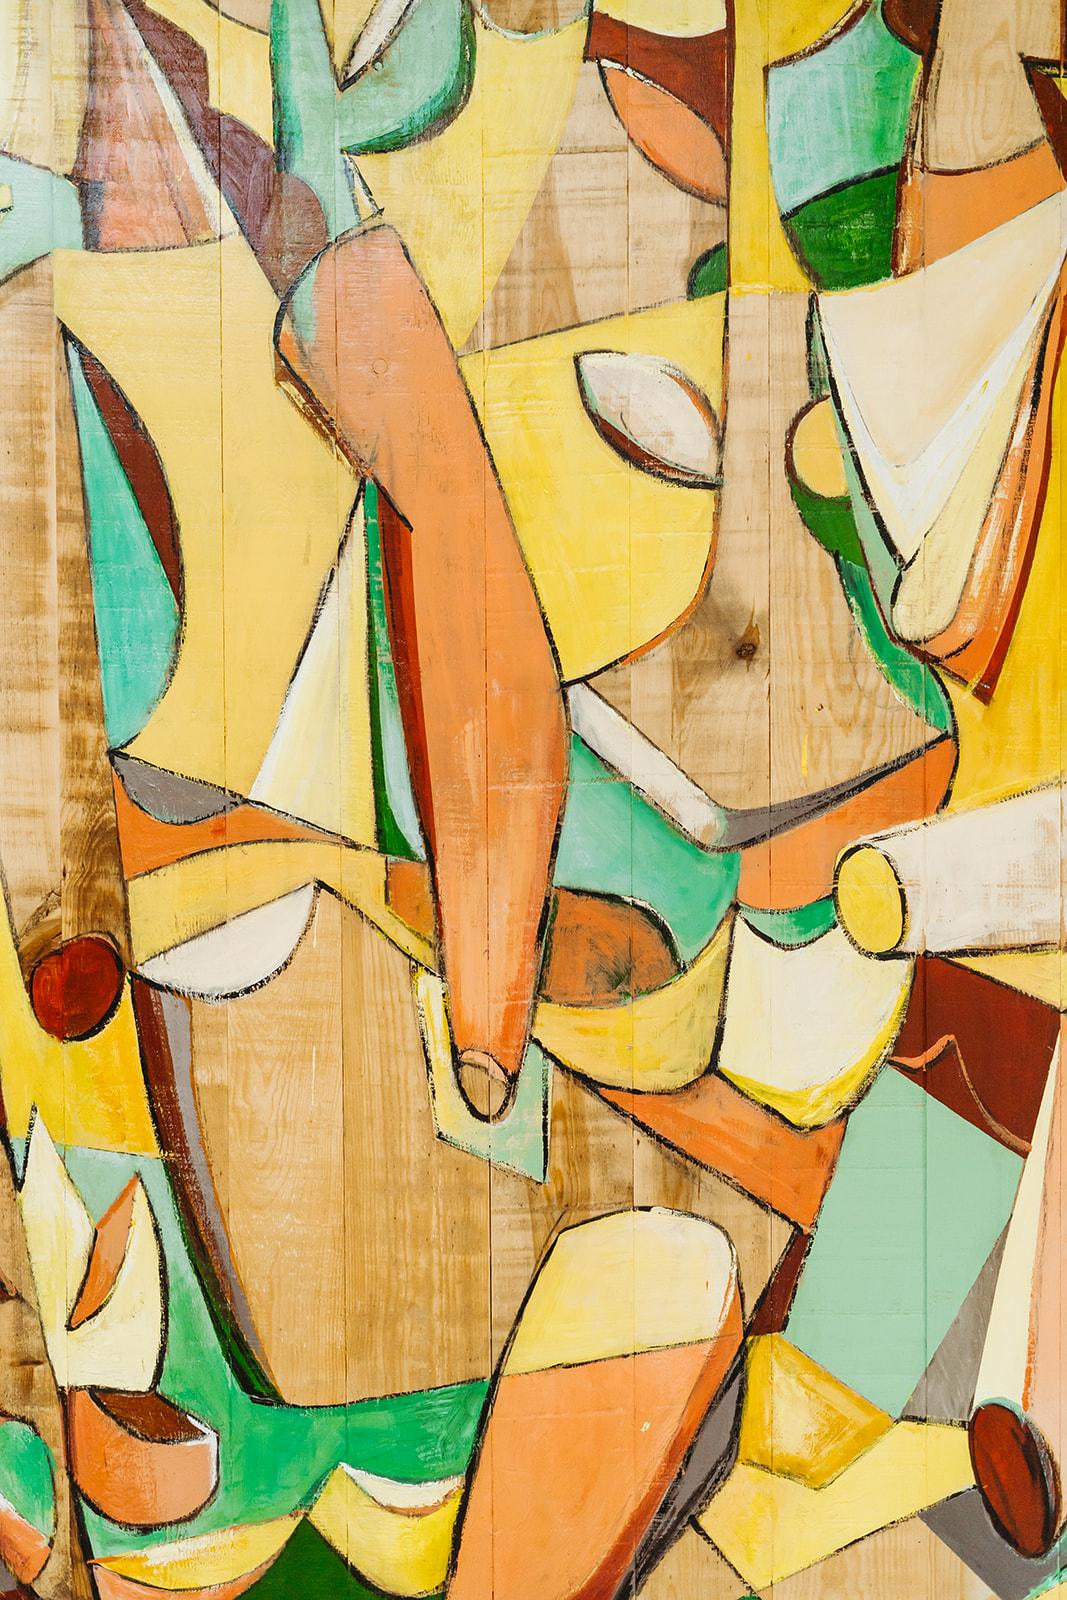 Hand-Painted contemporary neomodernist/neocubist painting on wood ... For Sale